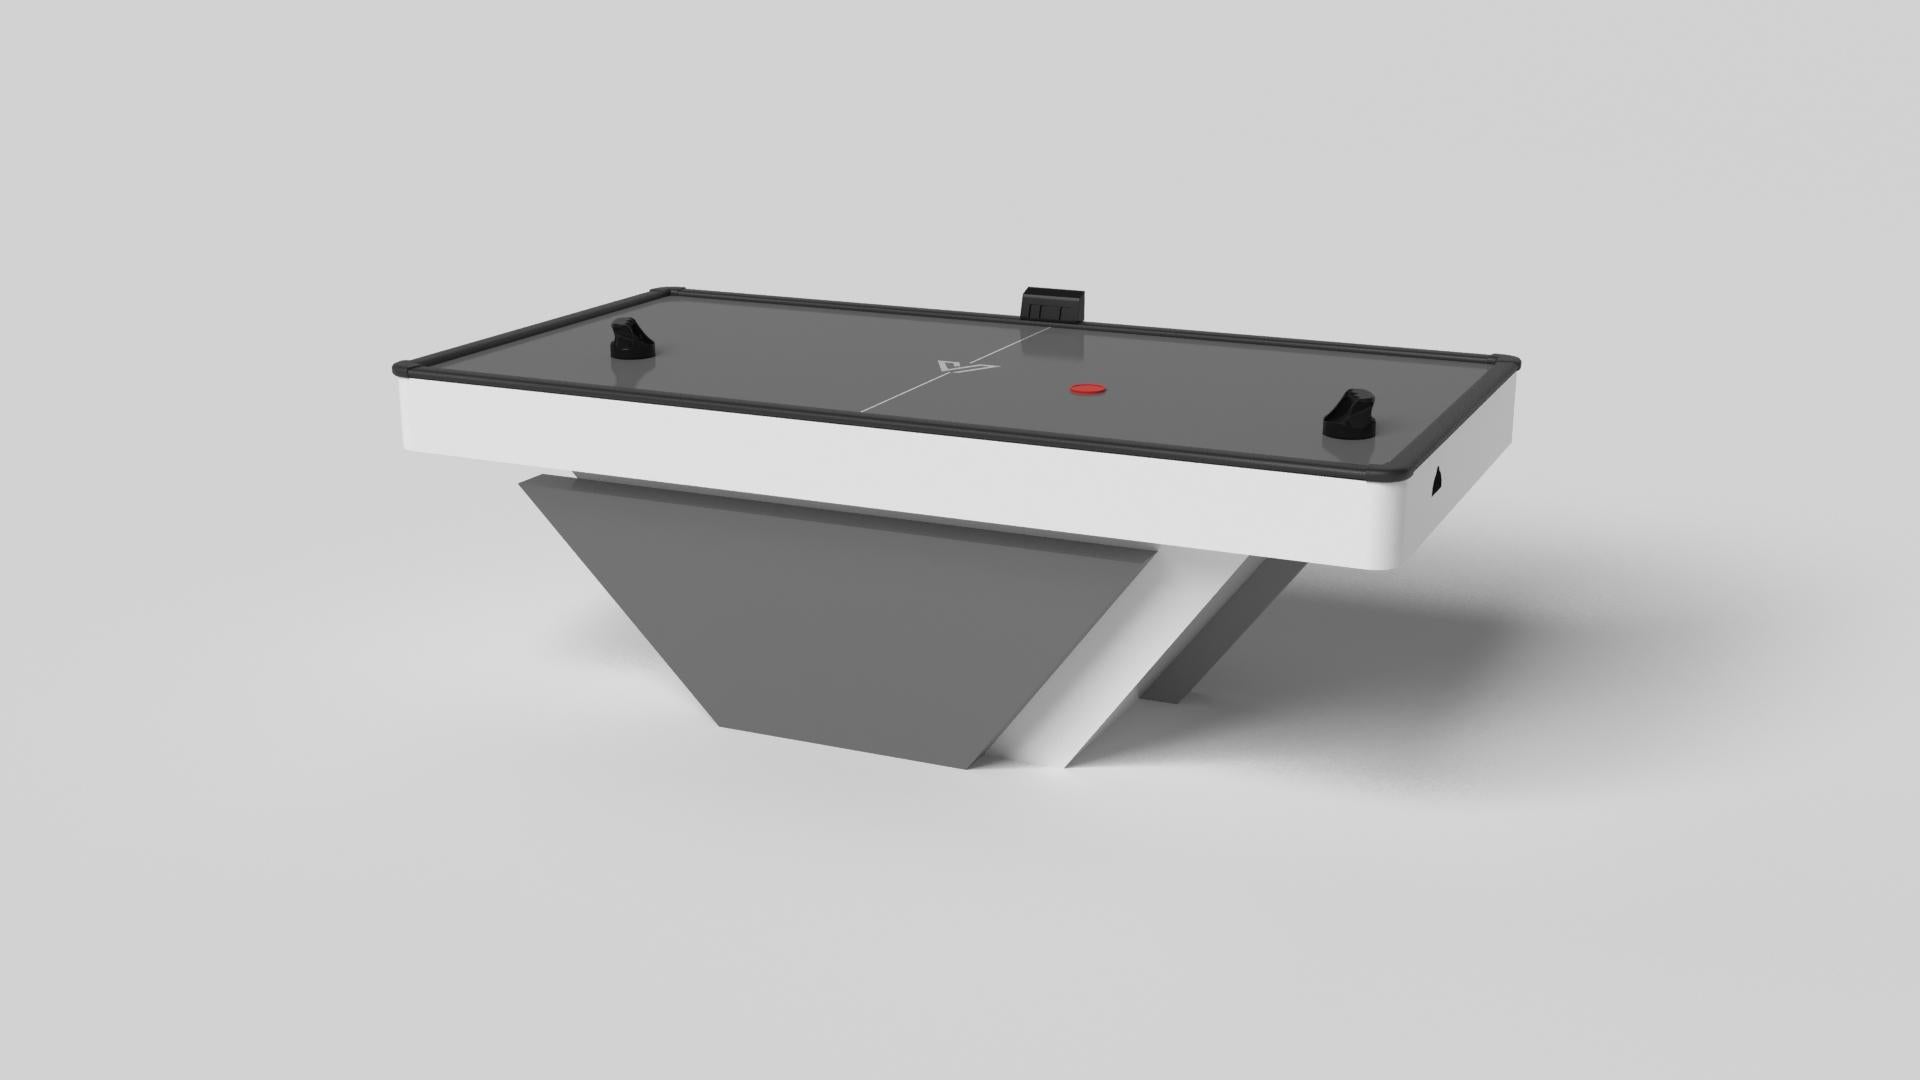 Handcrafted with clean lines, sharp angles, and a pyramid base, the Vogue air hockey table in chrome with black strikes the perfect balance between sport-inspired style and contemporary design. Timeless in its appeal and revered for its practicality